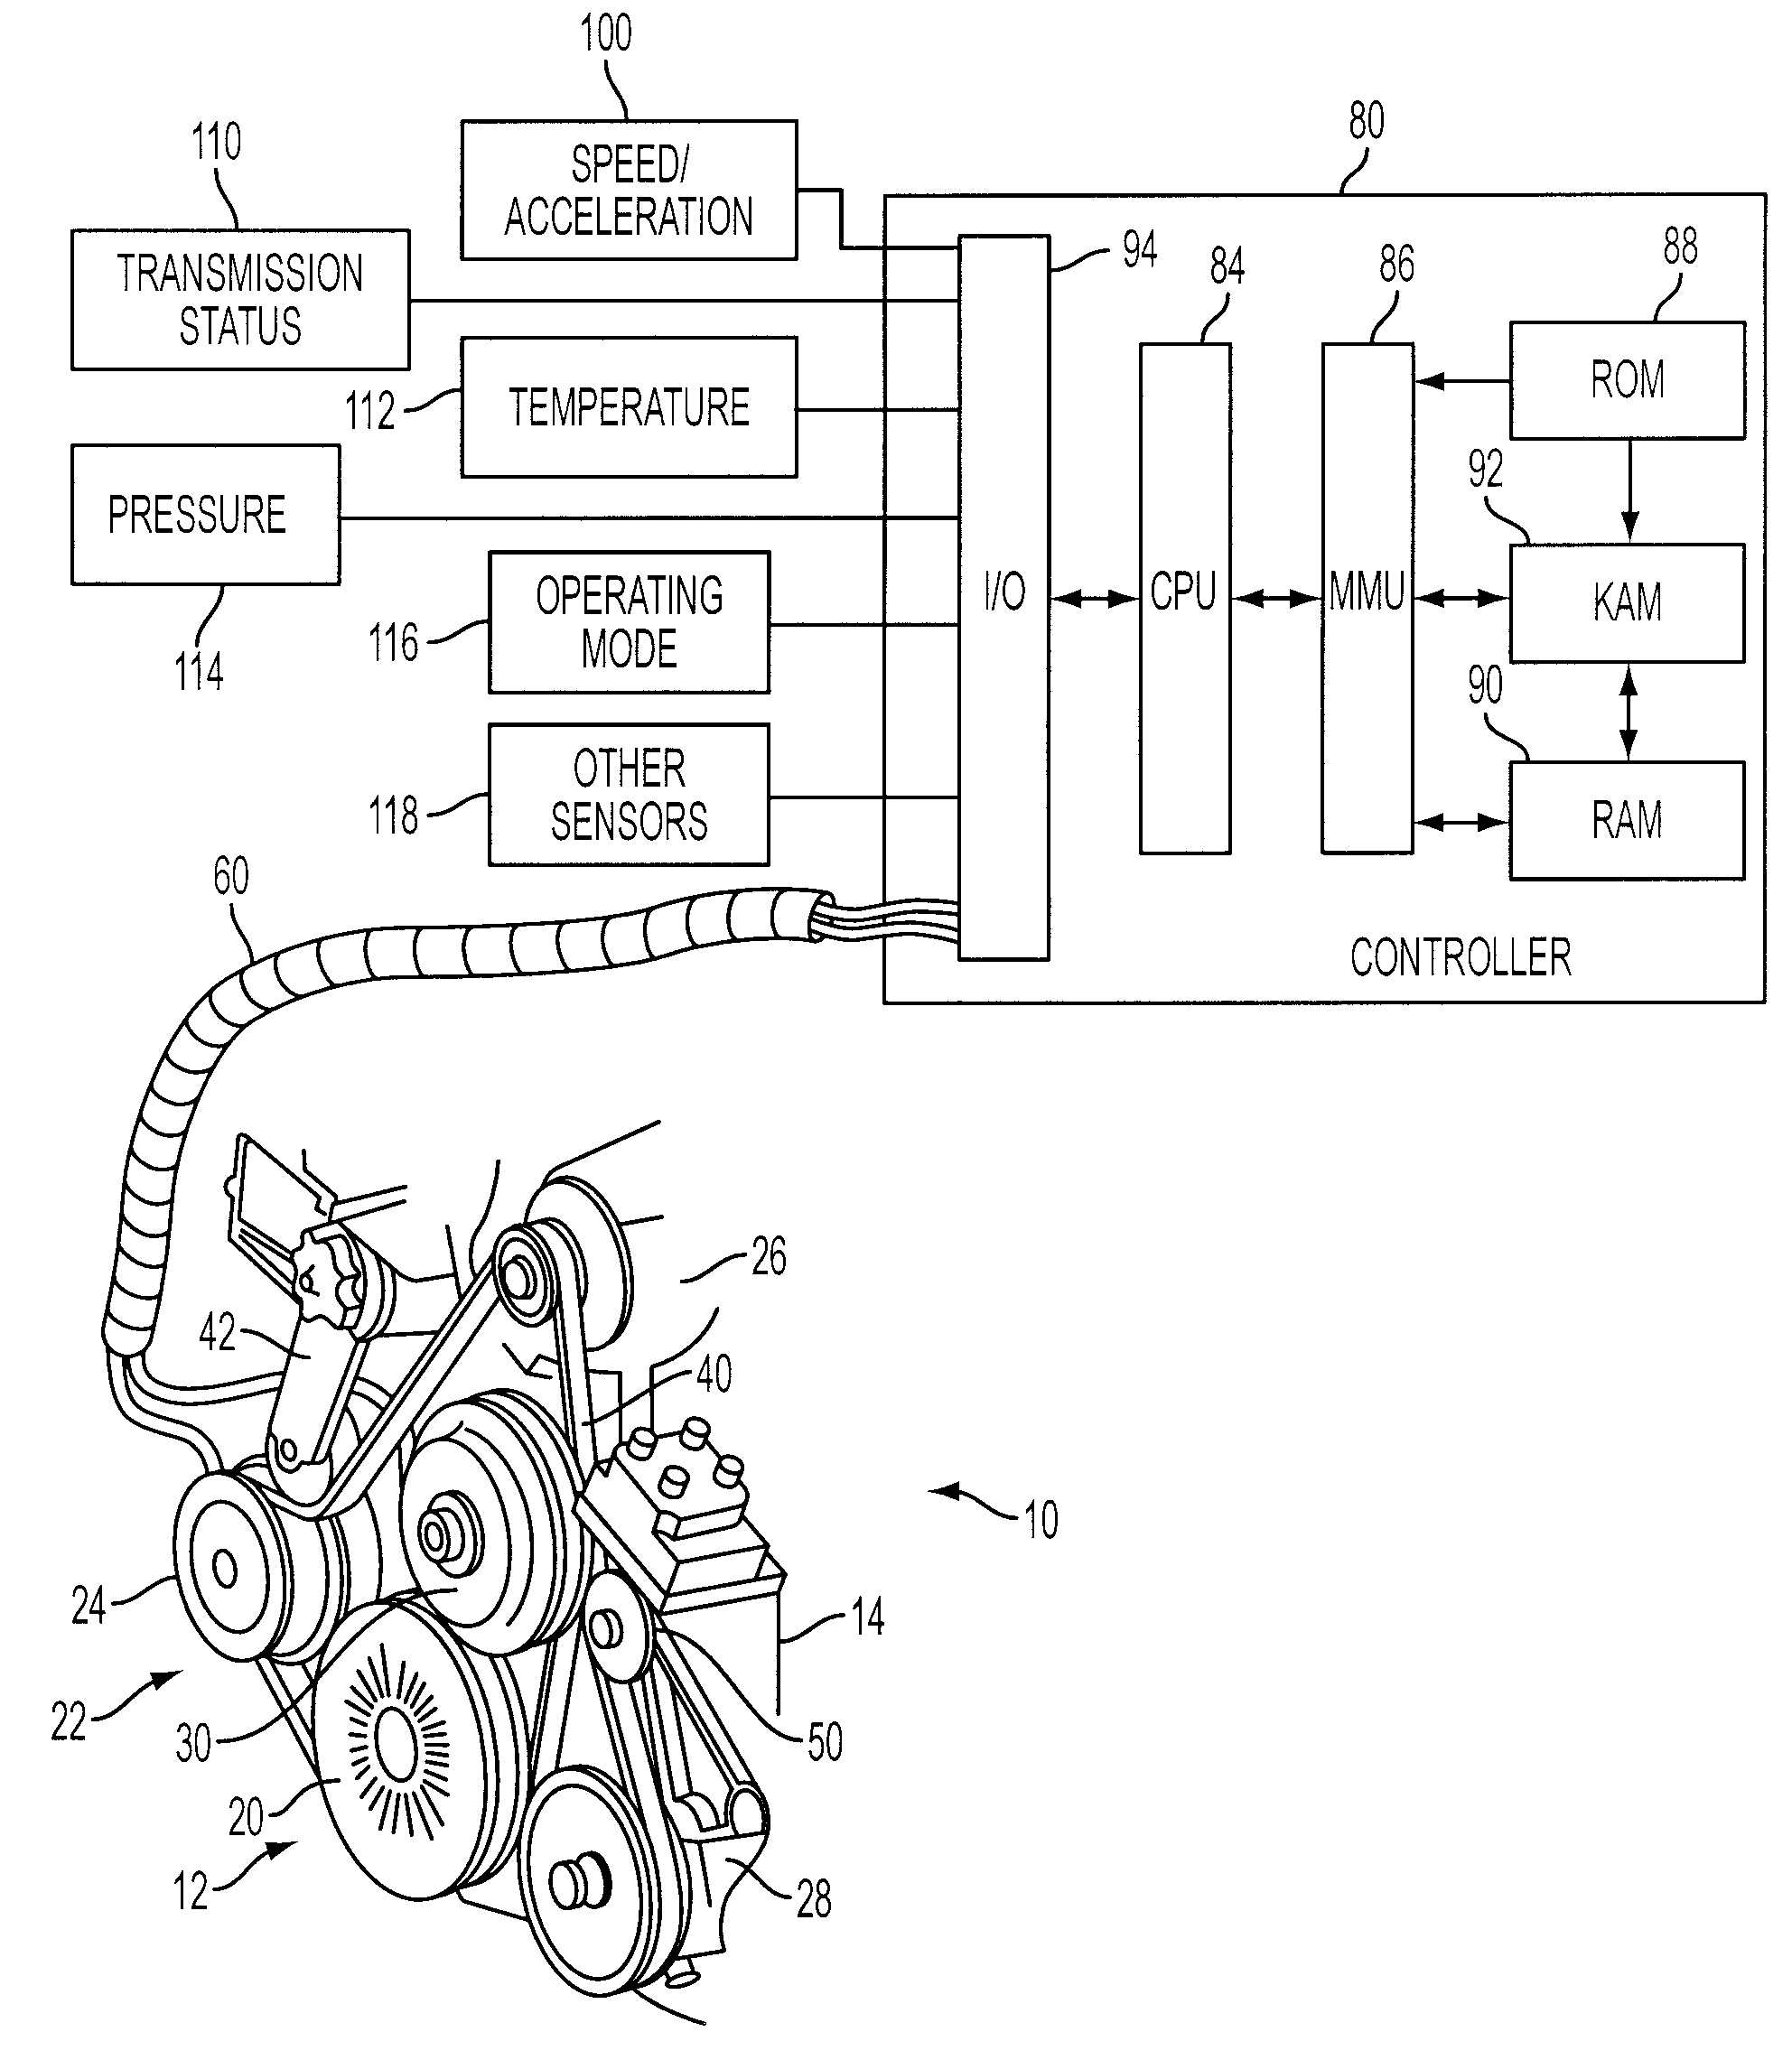 Electromagnetic coupling device for engine accessories